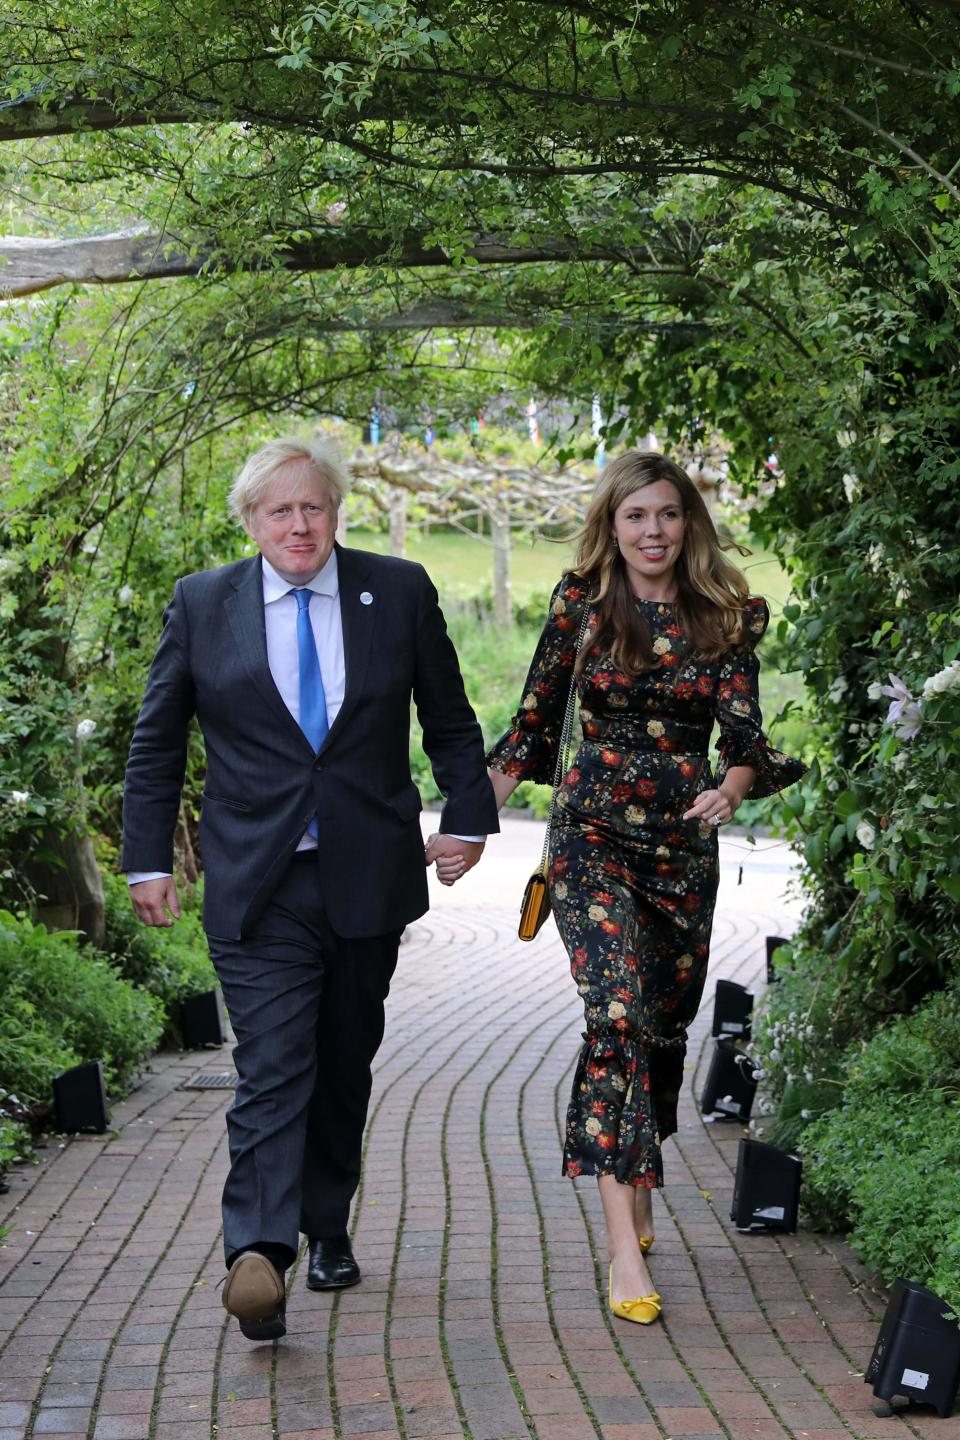 Mr and Mrs Johnson welcomed the Queen at the Eden Project (POOL/AFP via Getty Images)